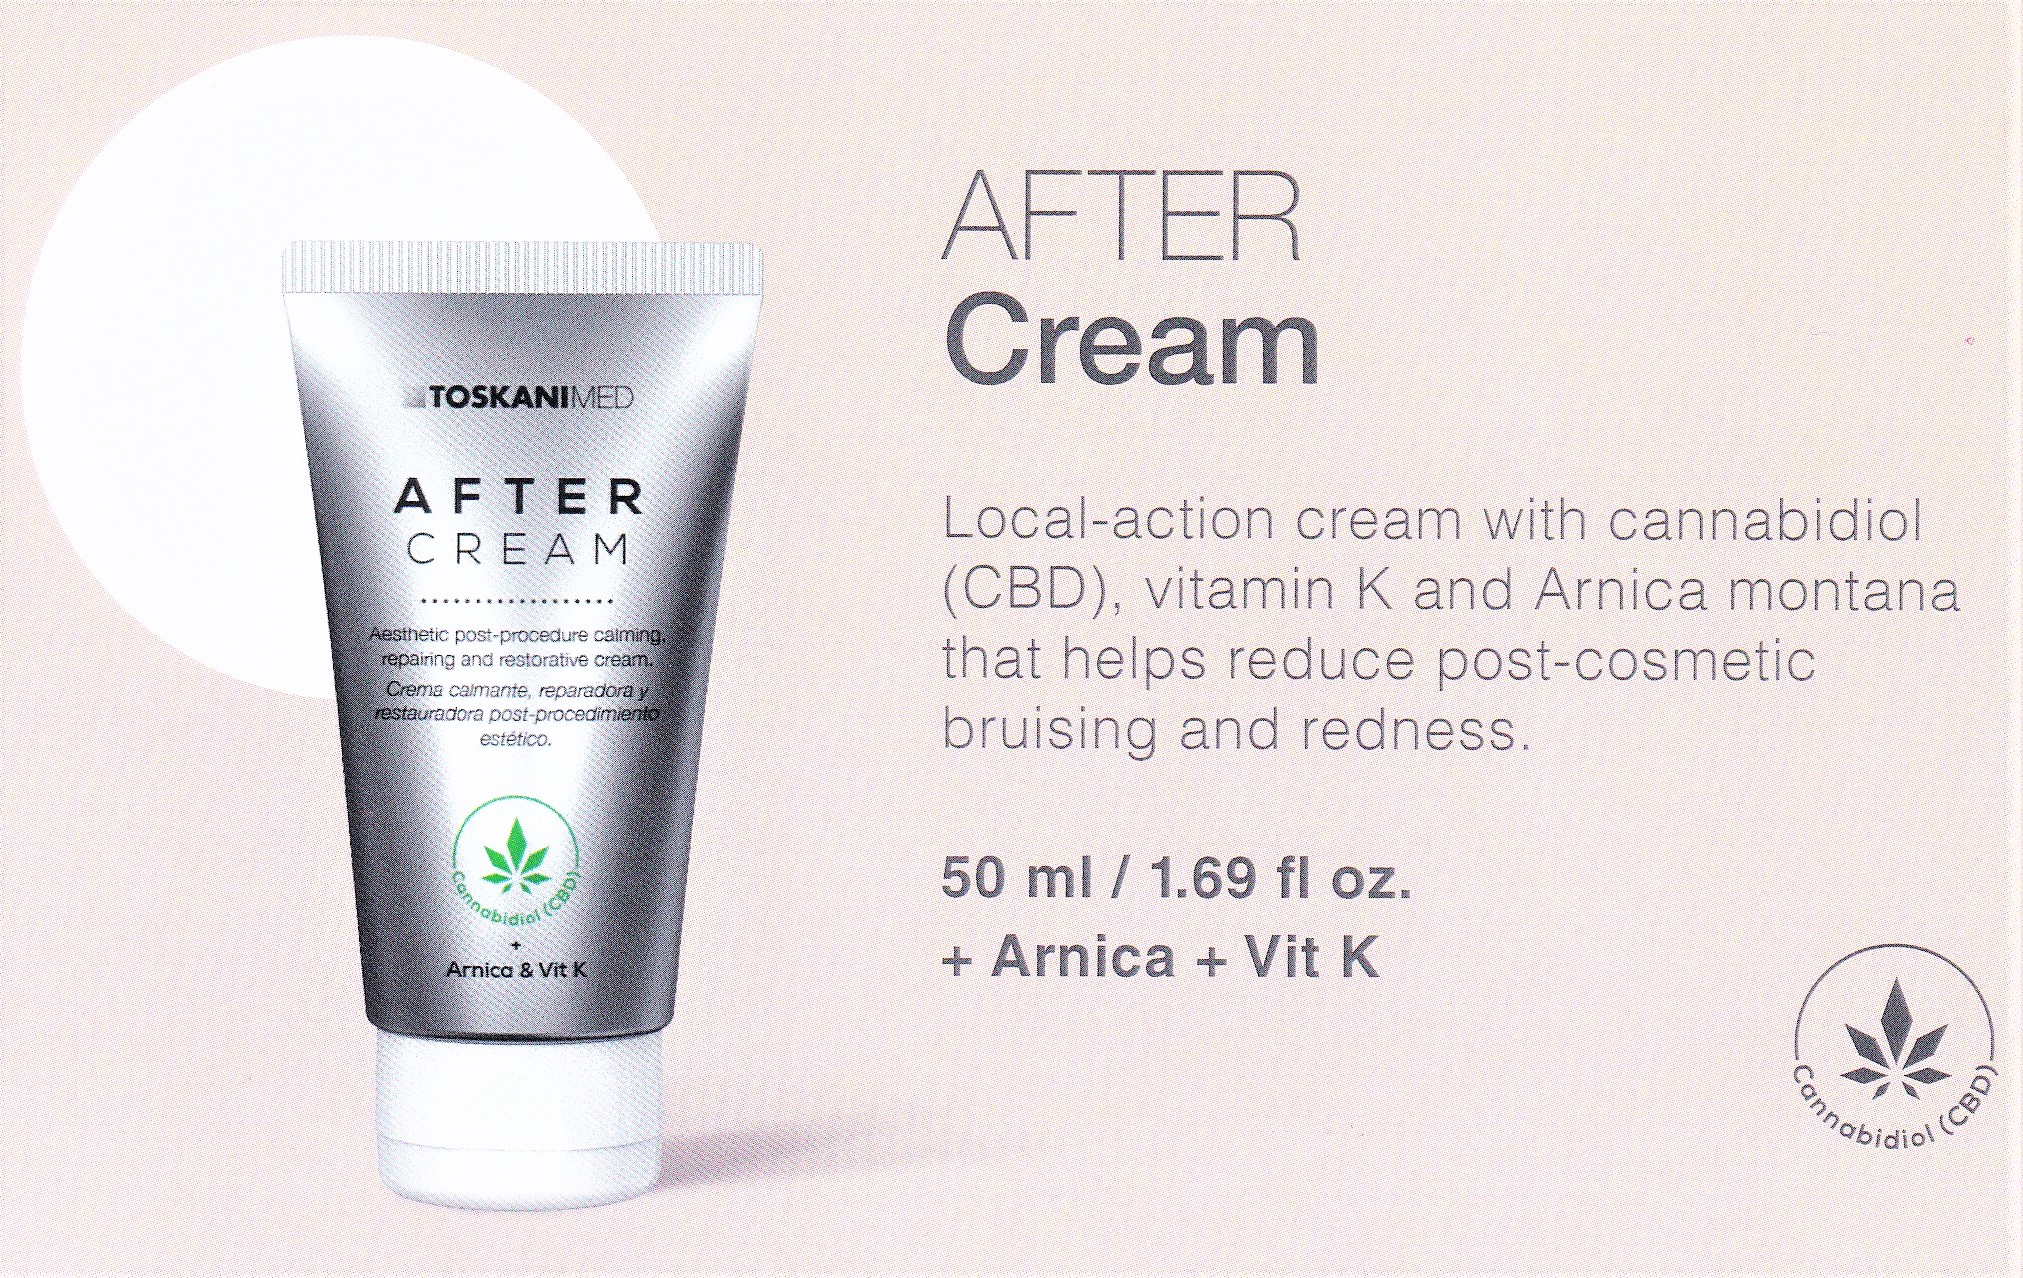 After Cream